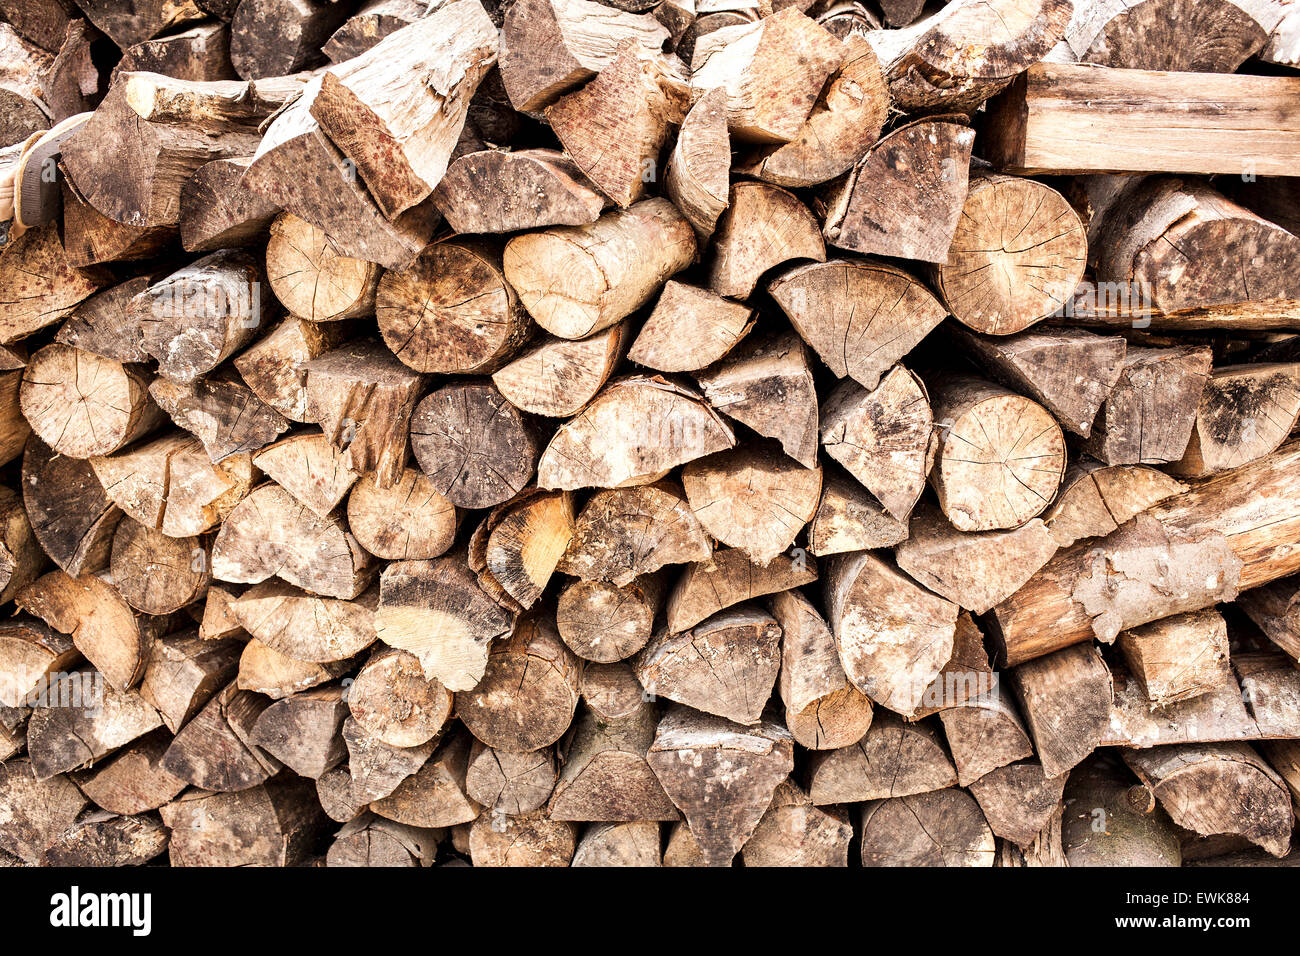 wood for fireplaces Stock Photo